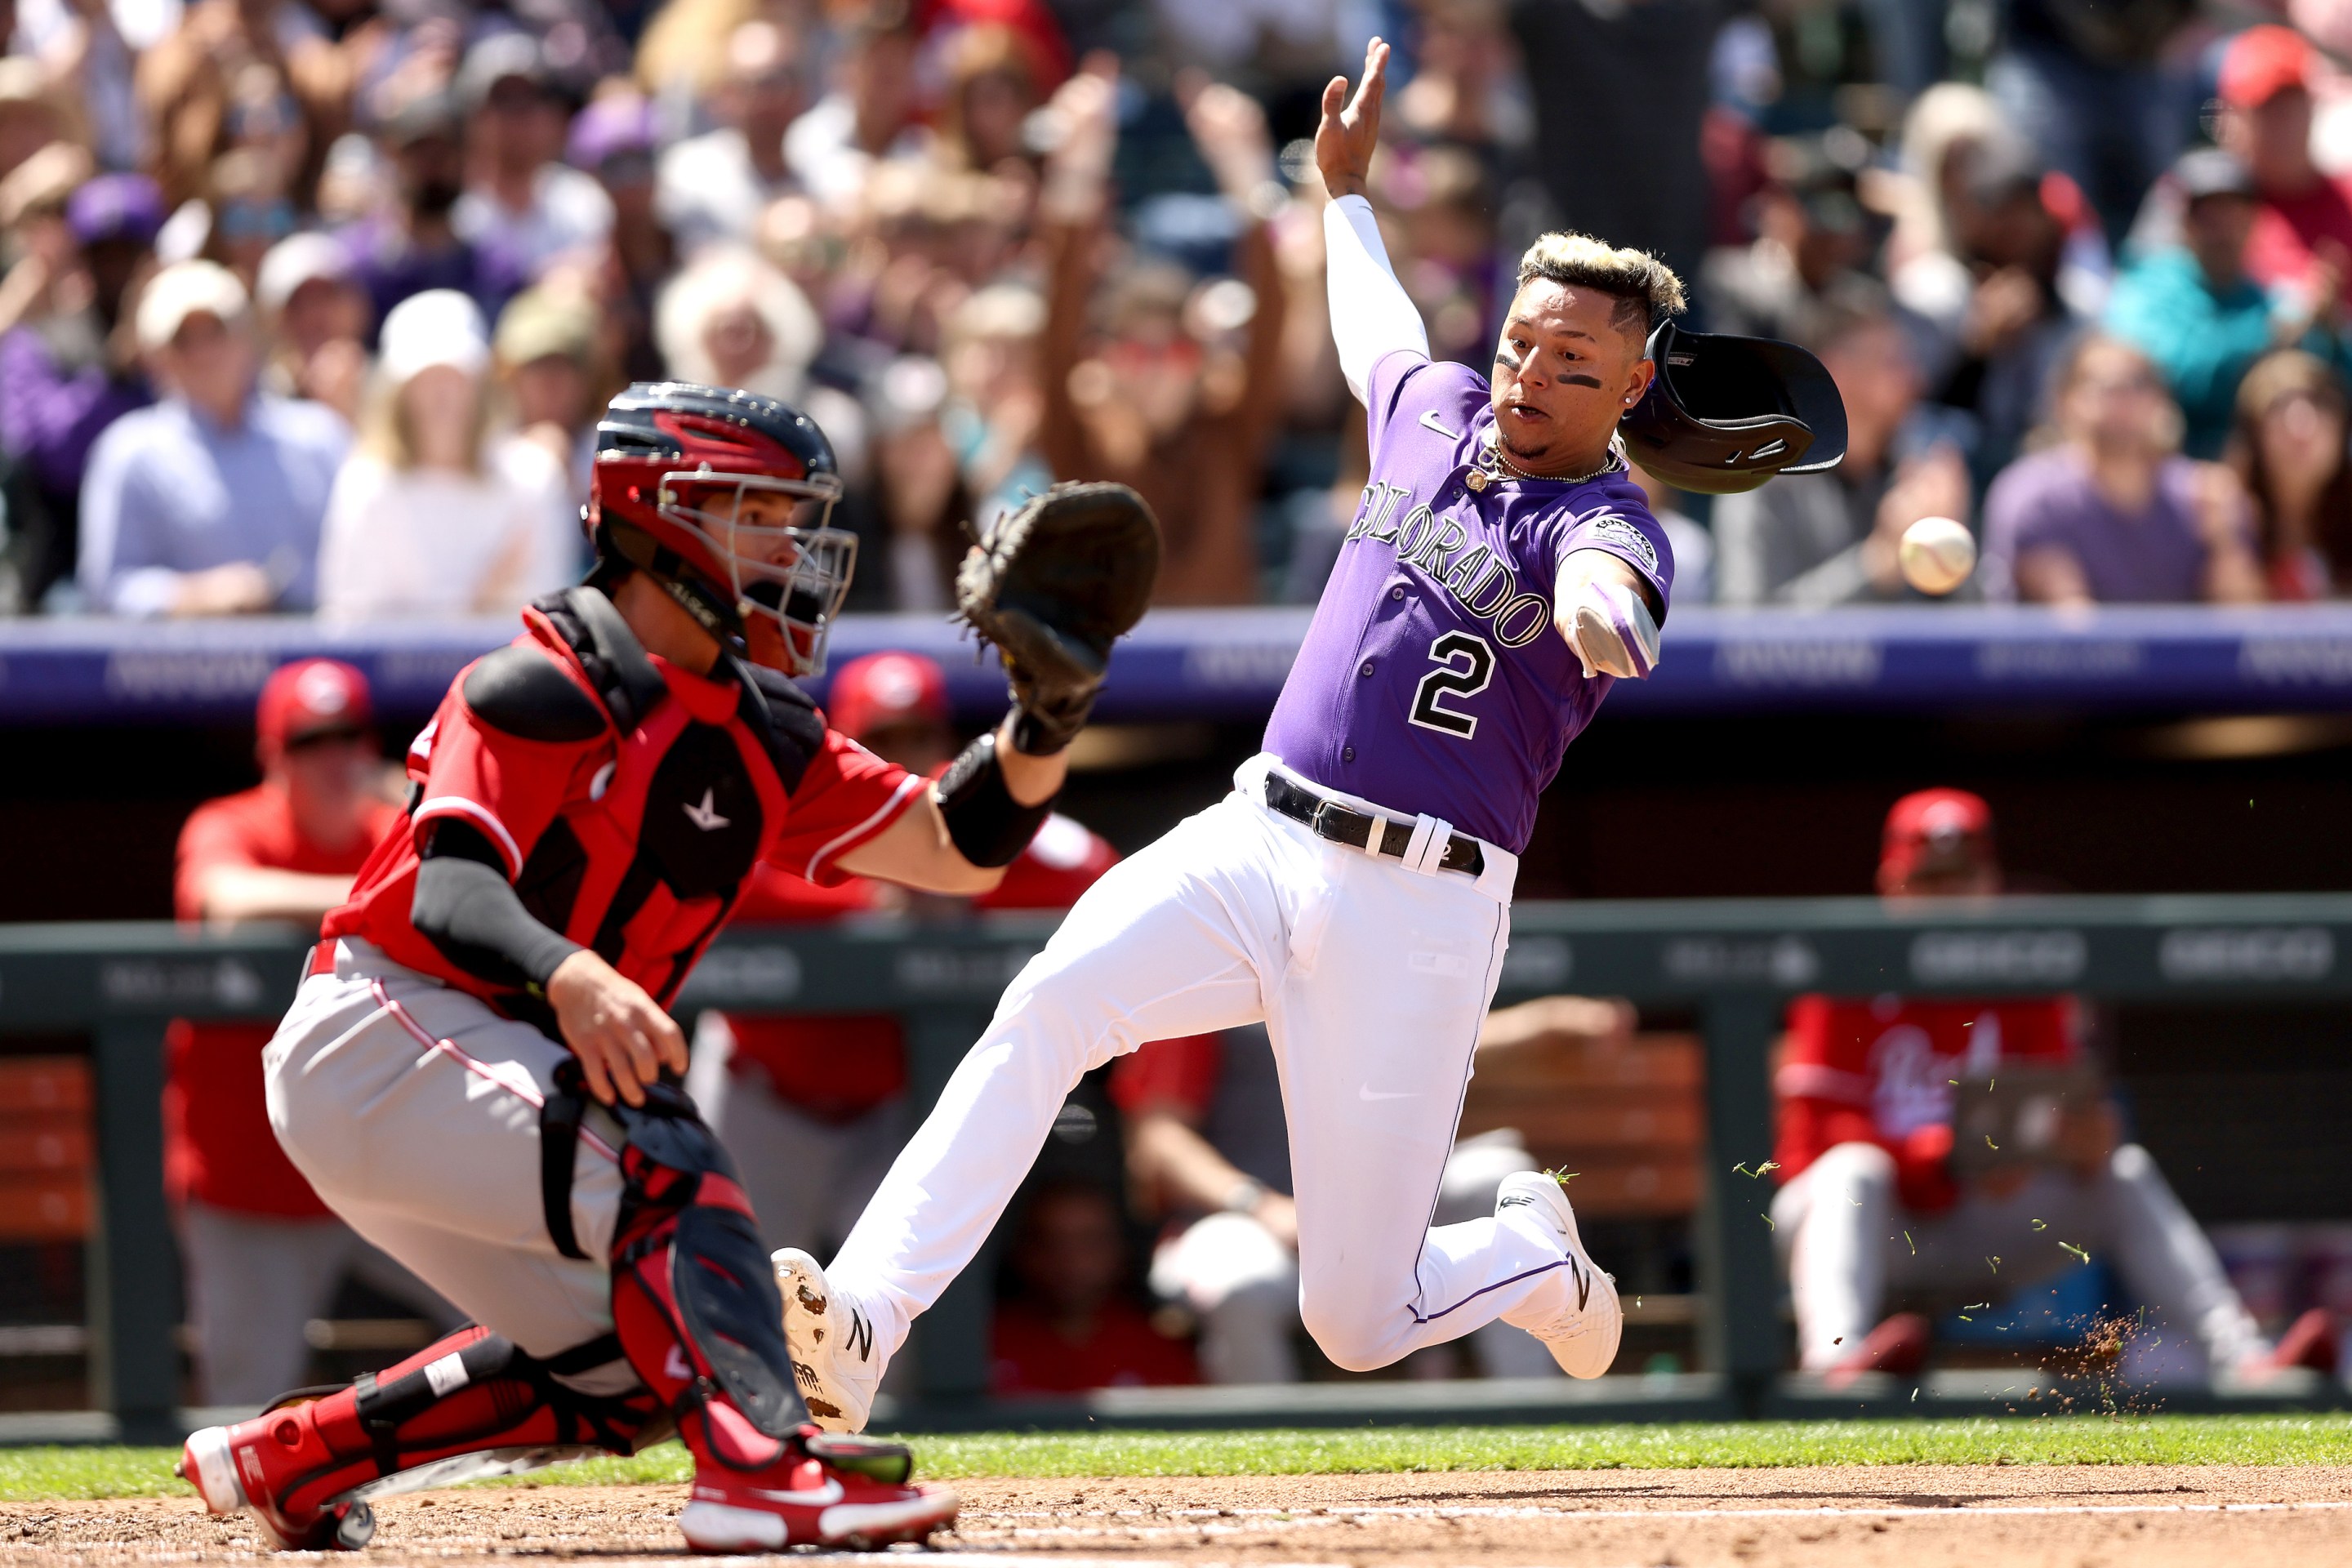 Rockies outfielder Yonathan Daza slides past Reds catcher Mark Kolozsvary in a 10-1 Rockies win.